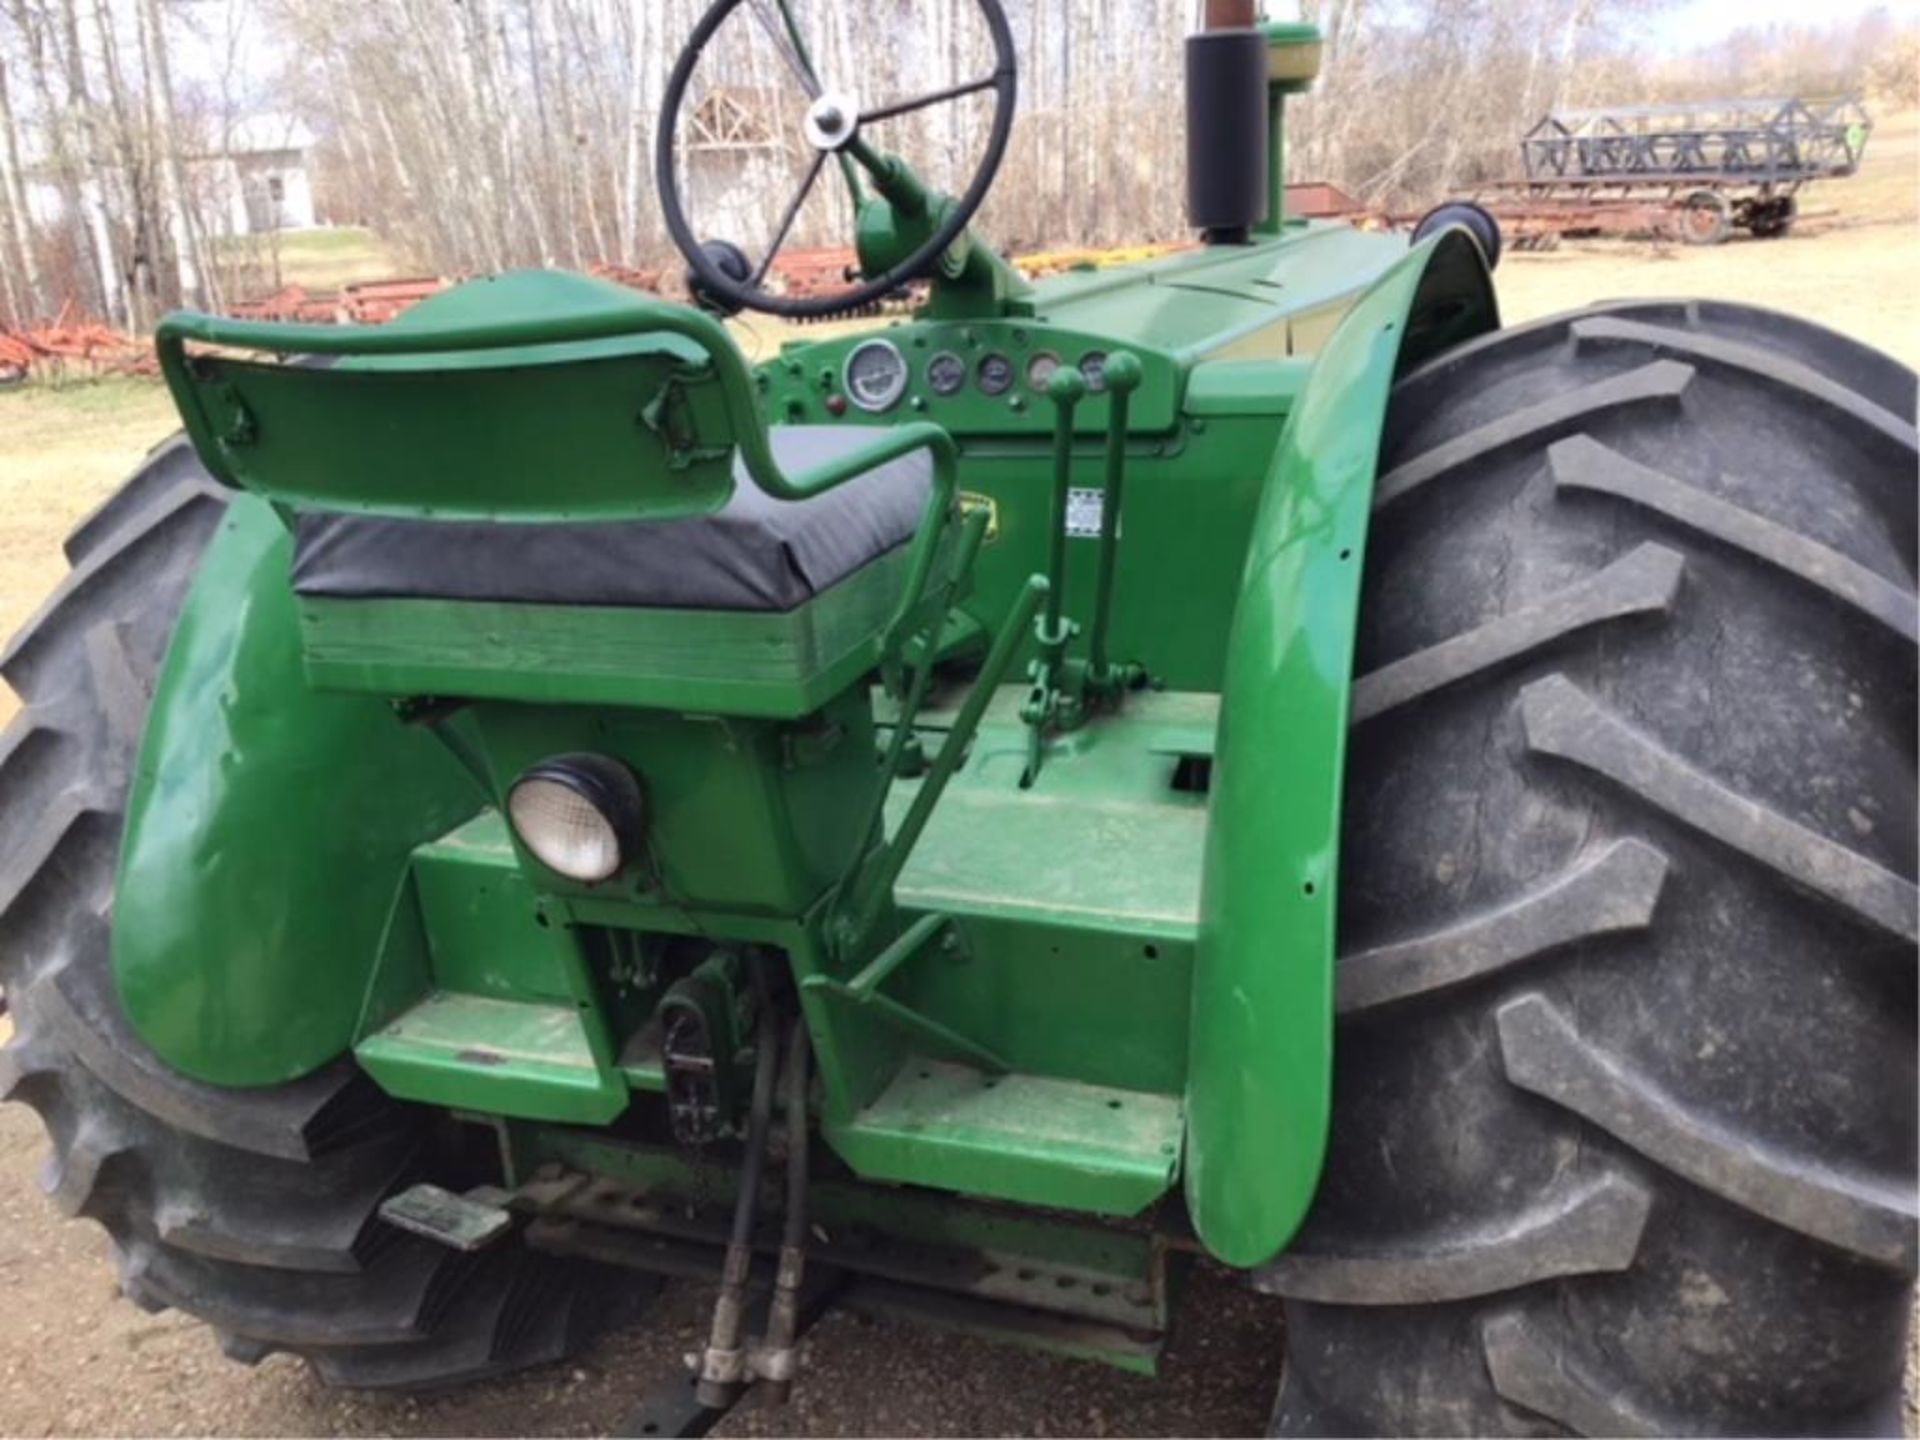 80 John Deere Antique Tractor 2wd, 2cyl diesel, Stn Trans, 540PTO, 2hyd outlets, 60hp, 23.1-26rr, - Image 3 of 5